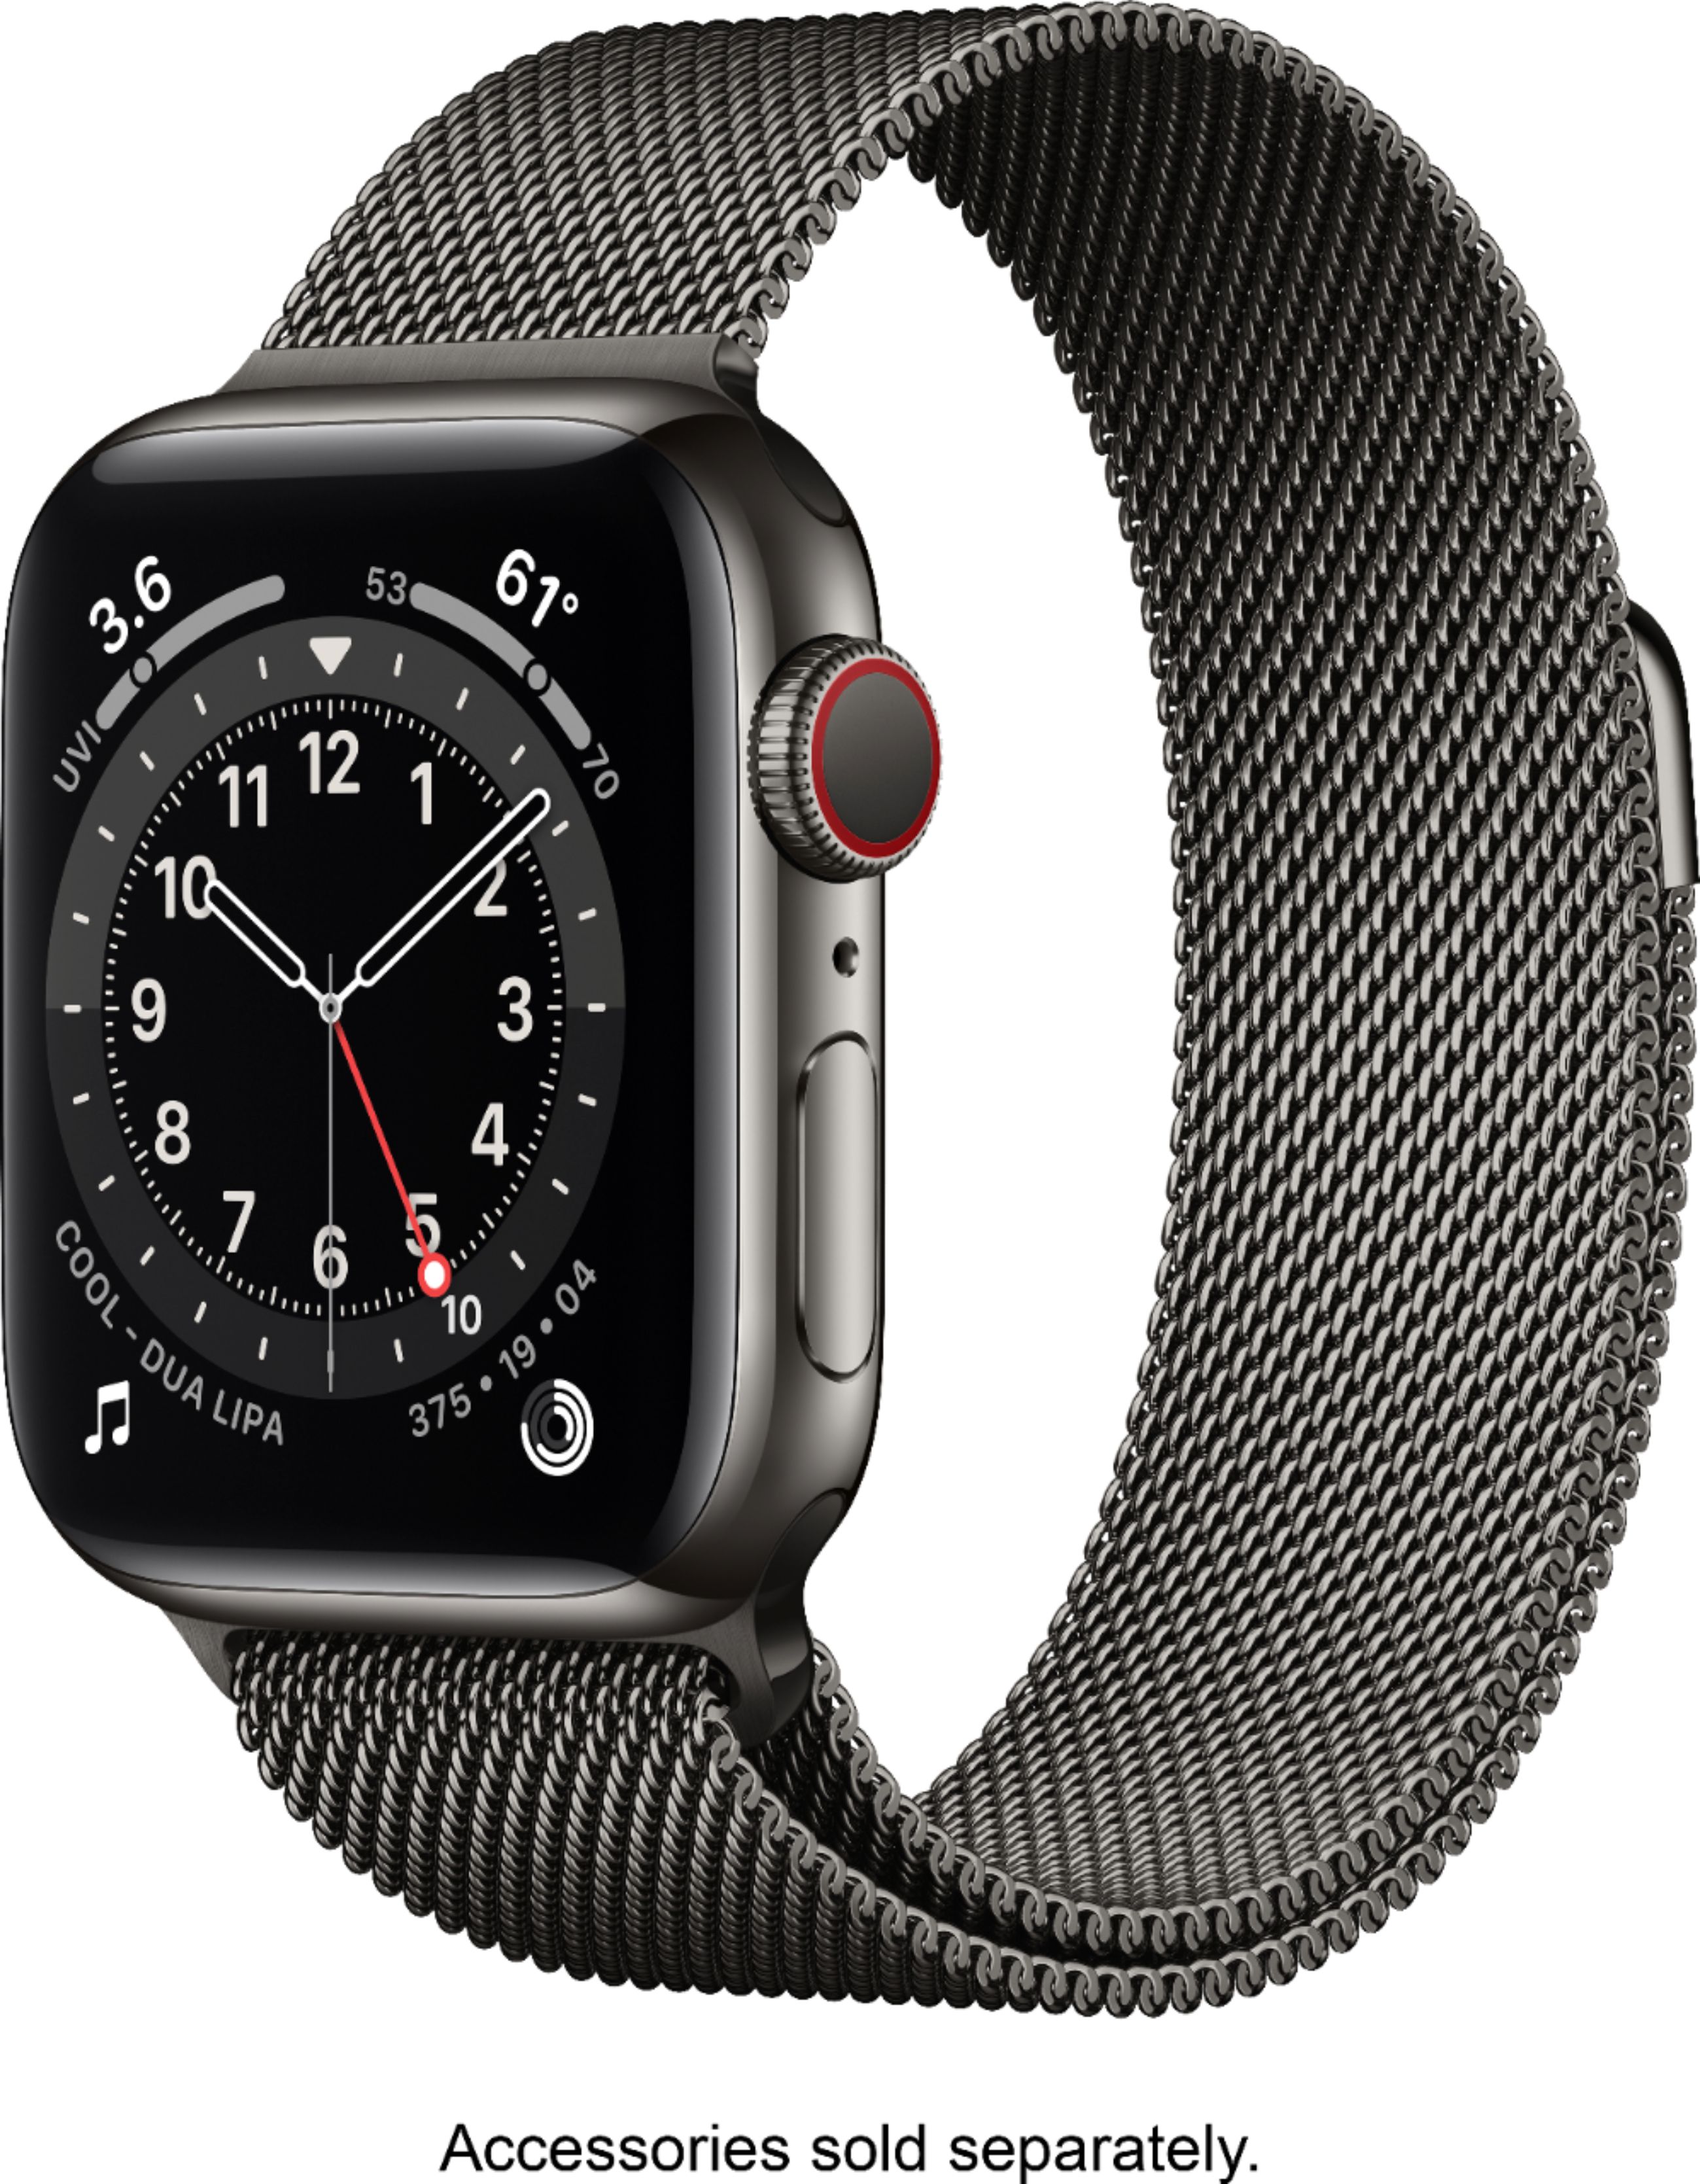 Apple Watch Series 6 (GPS + Cellular) 40mm Graphite Stainless Steel